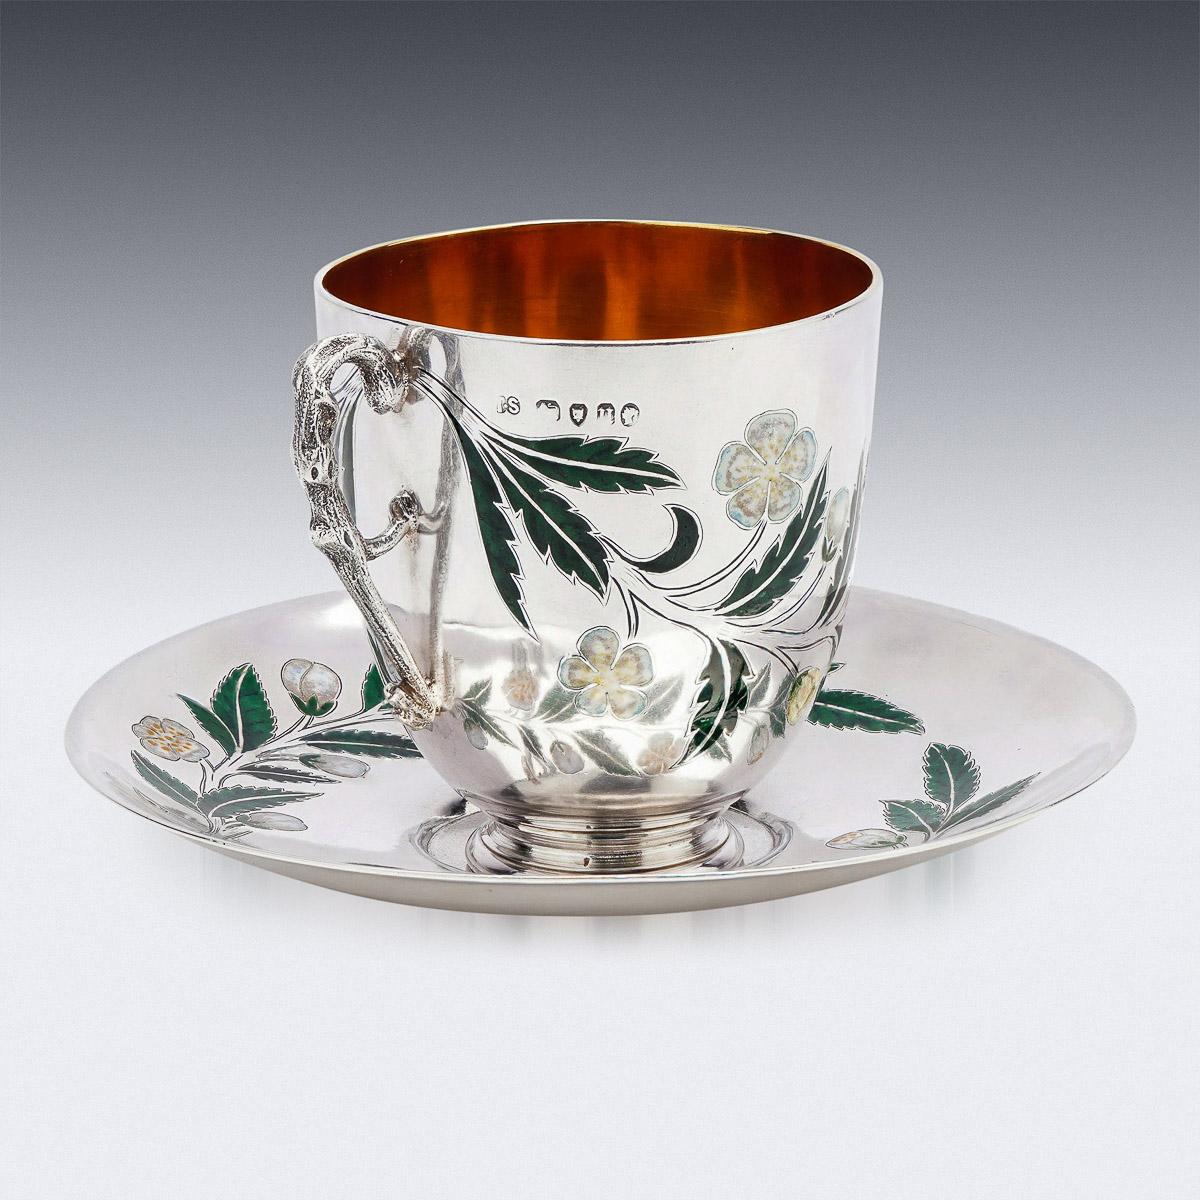 British 19th Century Victorian Solid Silver & Champleve Enamel Tea Cup and Sauce, c.1875 For Sale